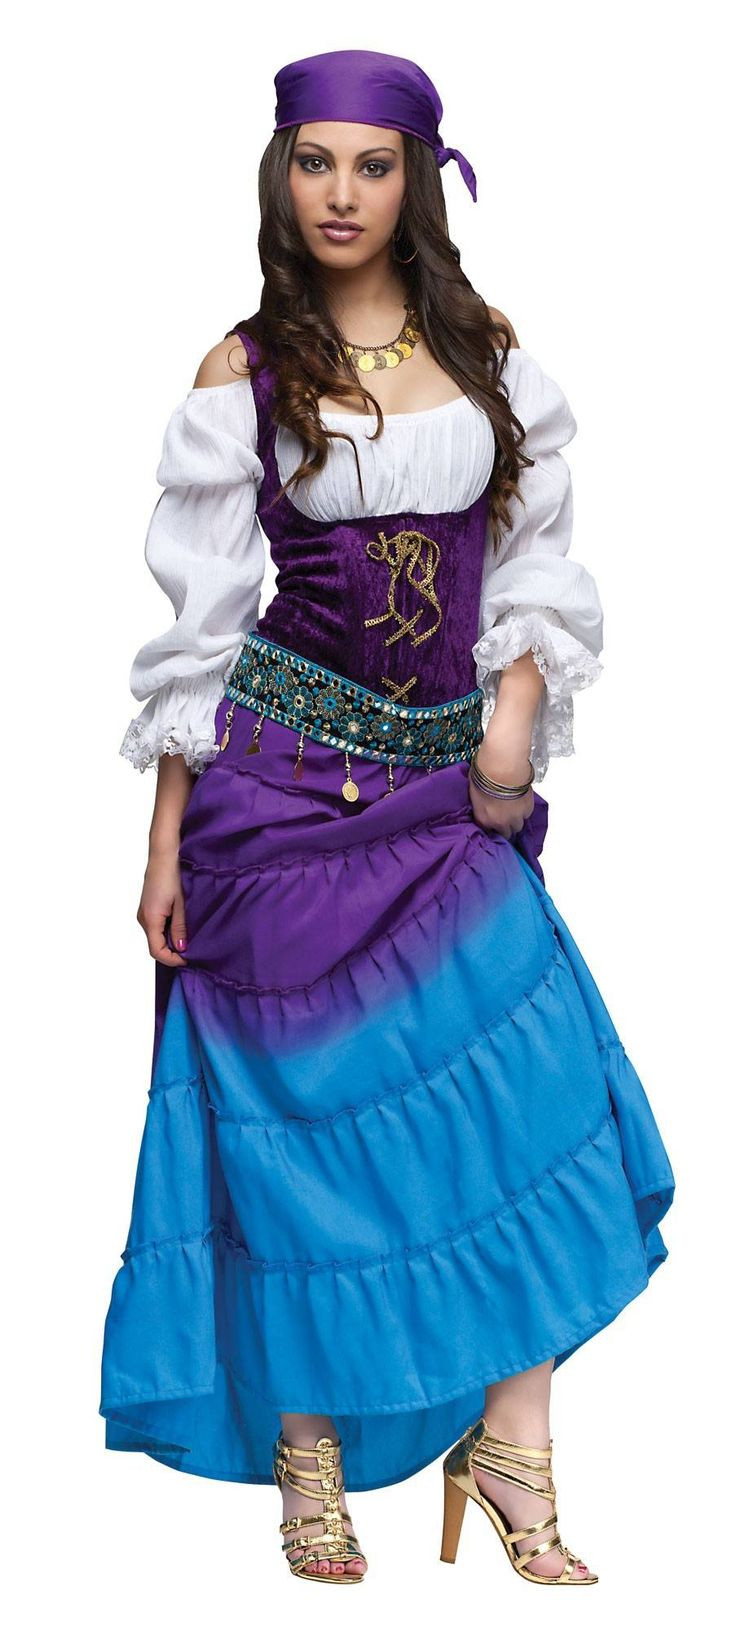 Gypsy Costume DIY
 17 Best images about gypsy costume ideas for Heather on